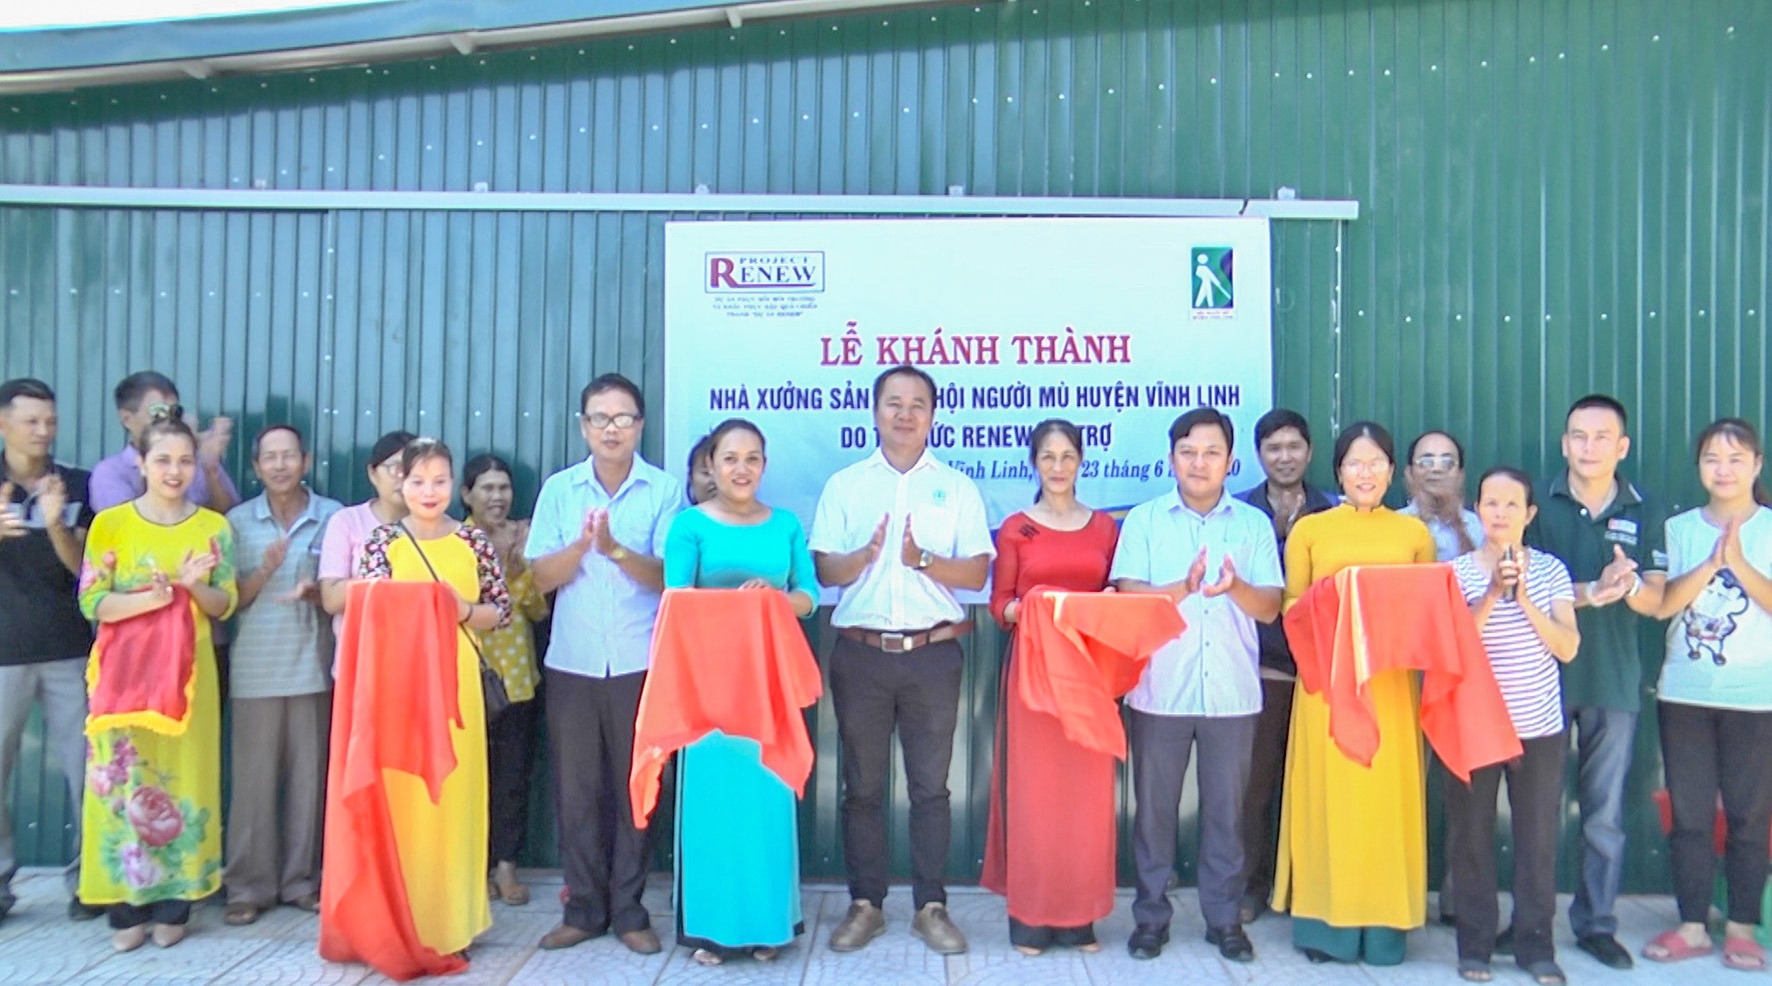 Quang Tri: Project RENEW launches newly-built workshop for blind association